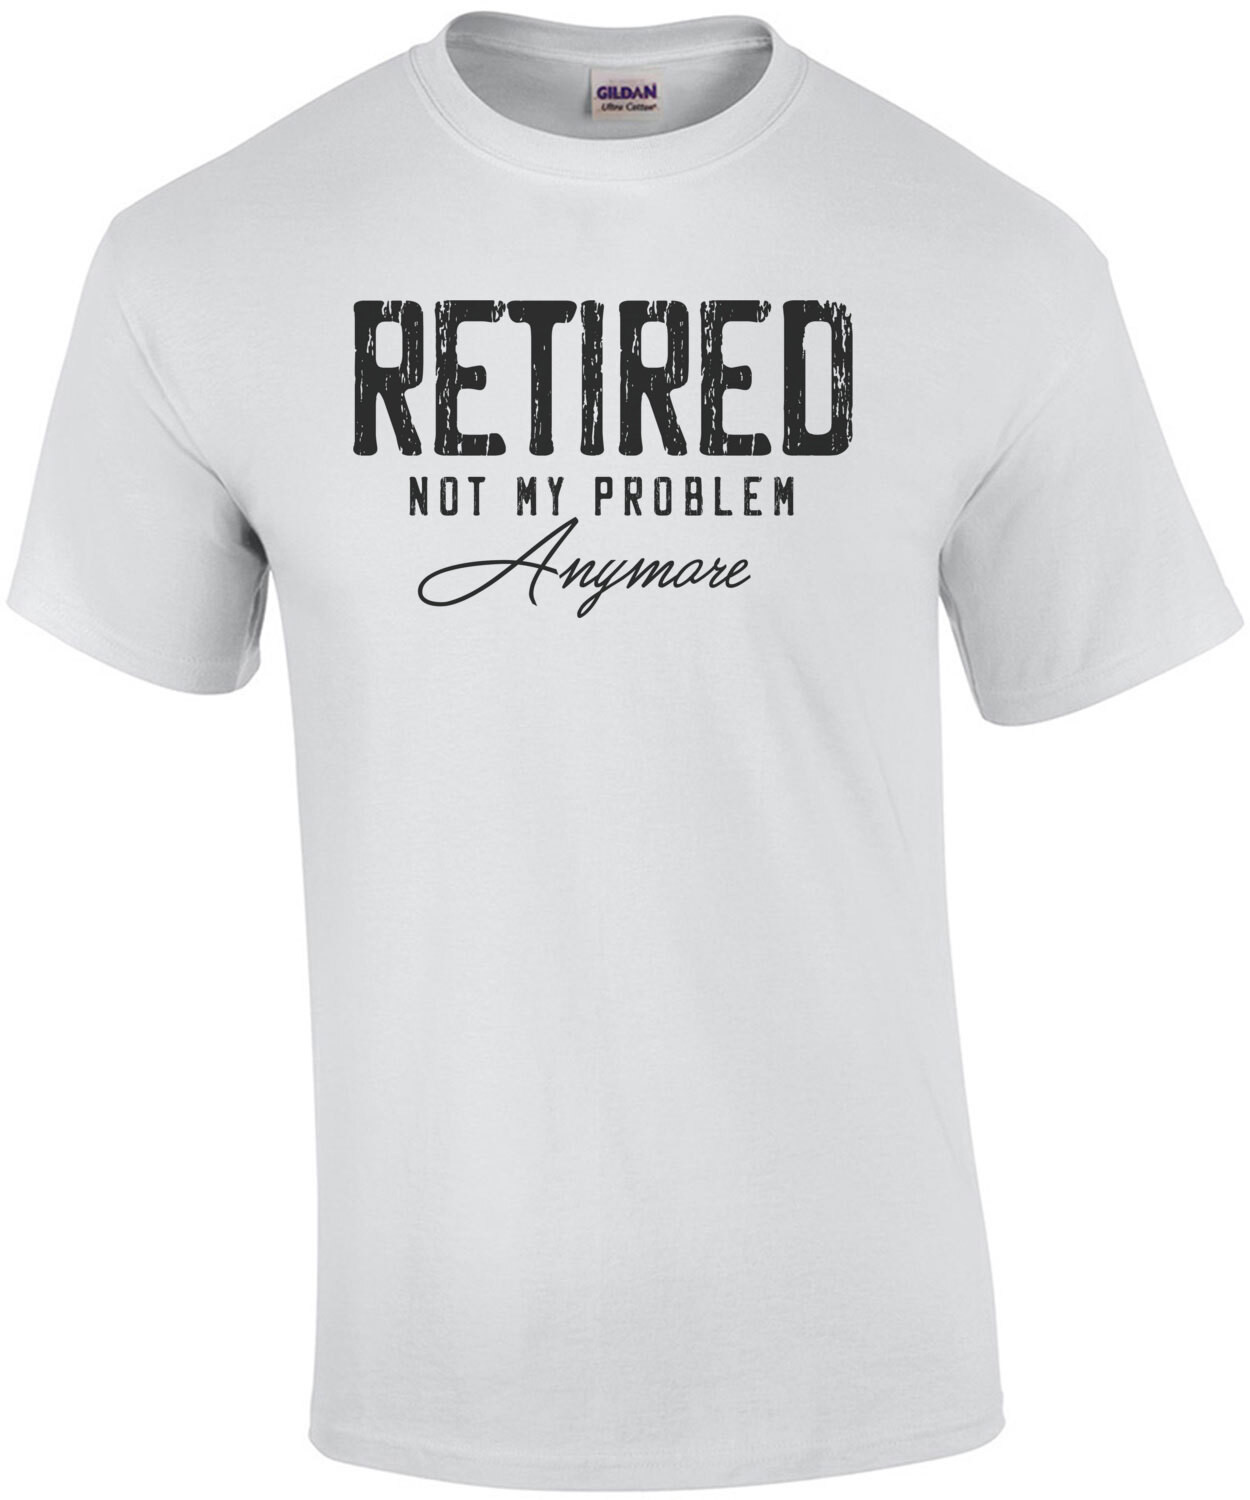 Retired - Not my problem anymore - retirement t-shirt